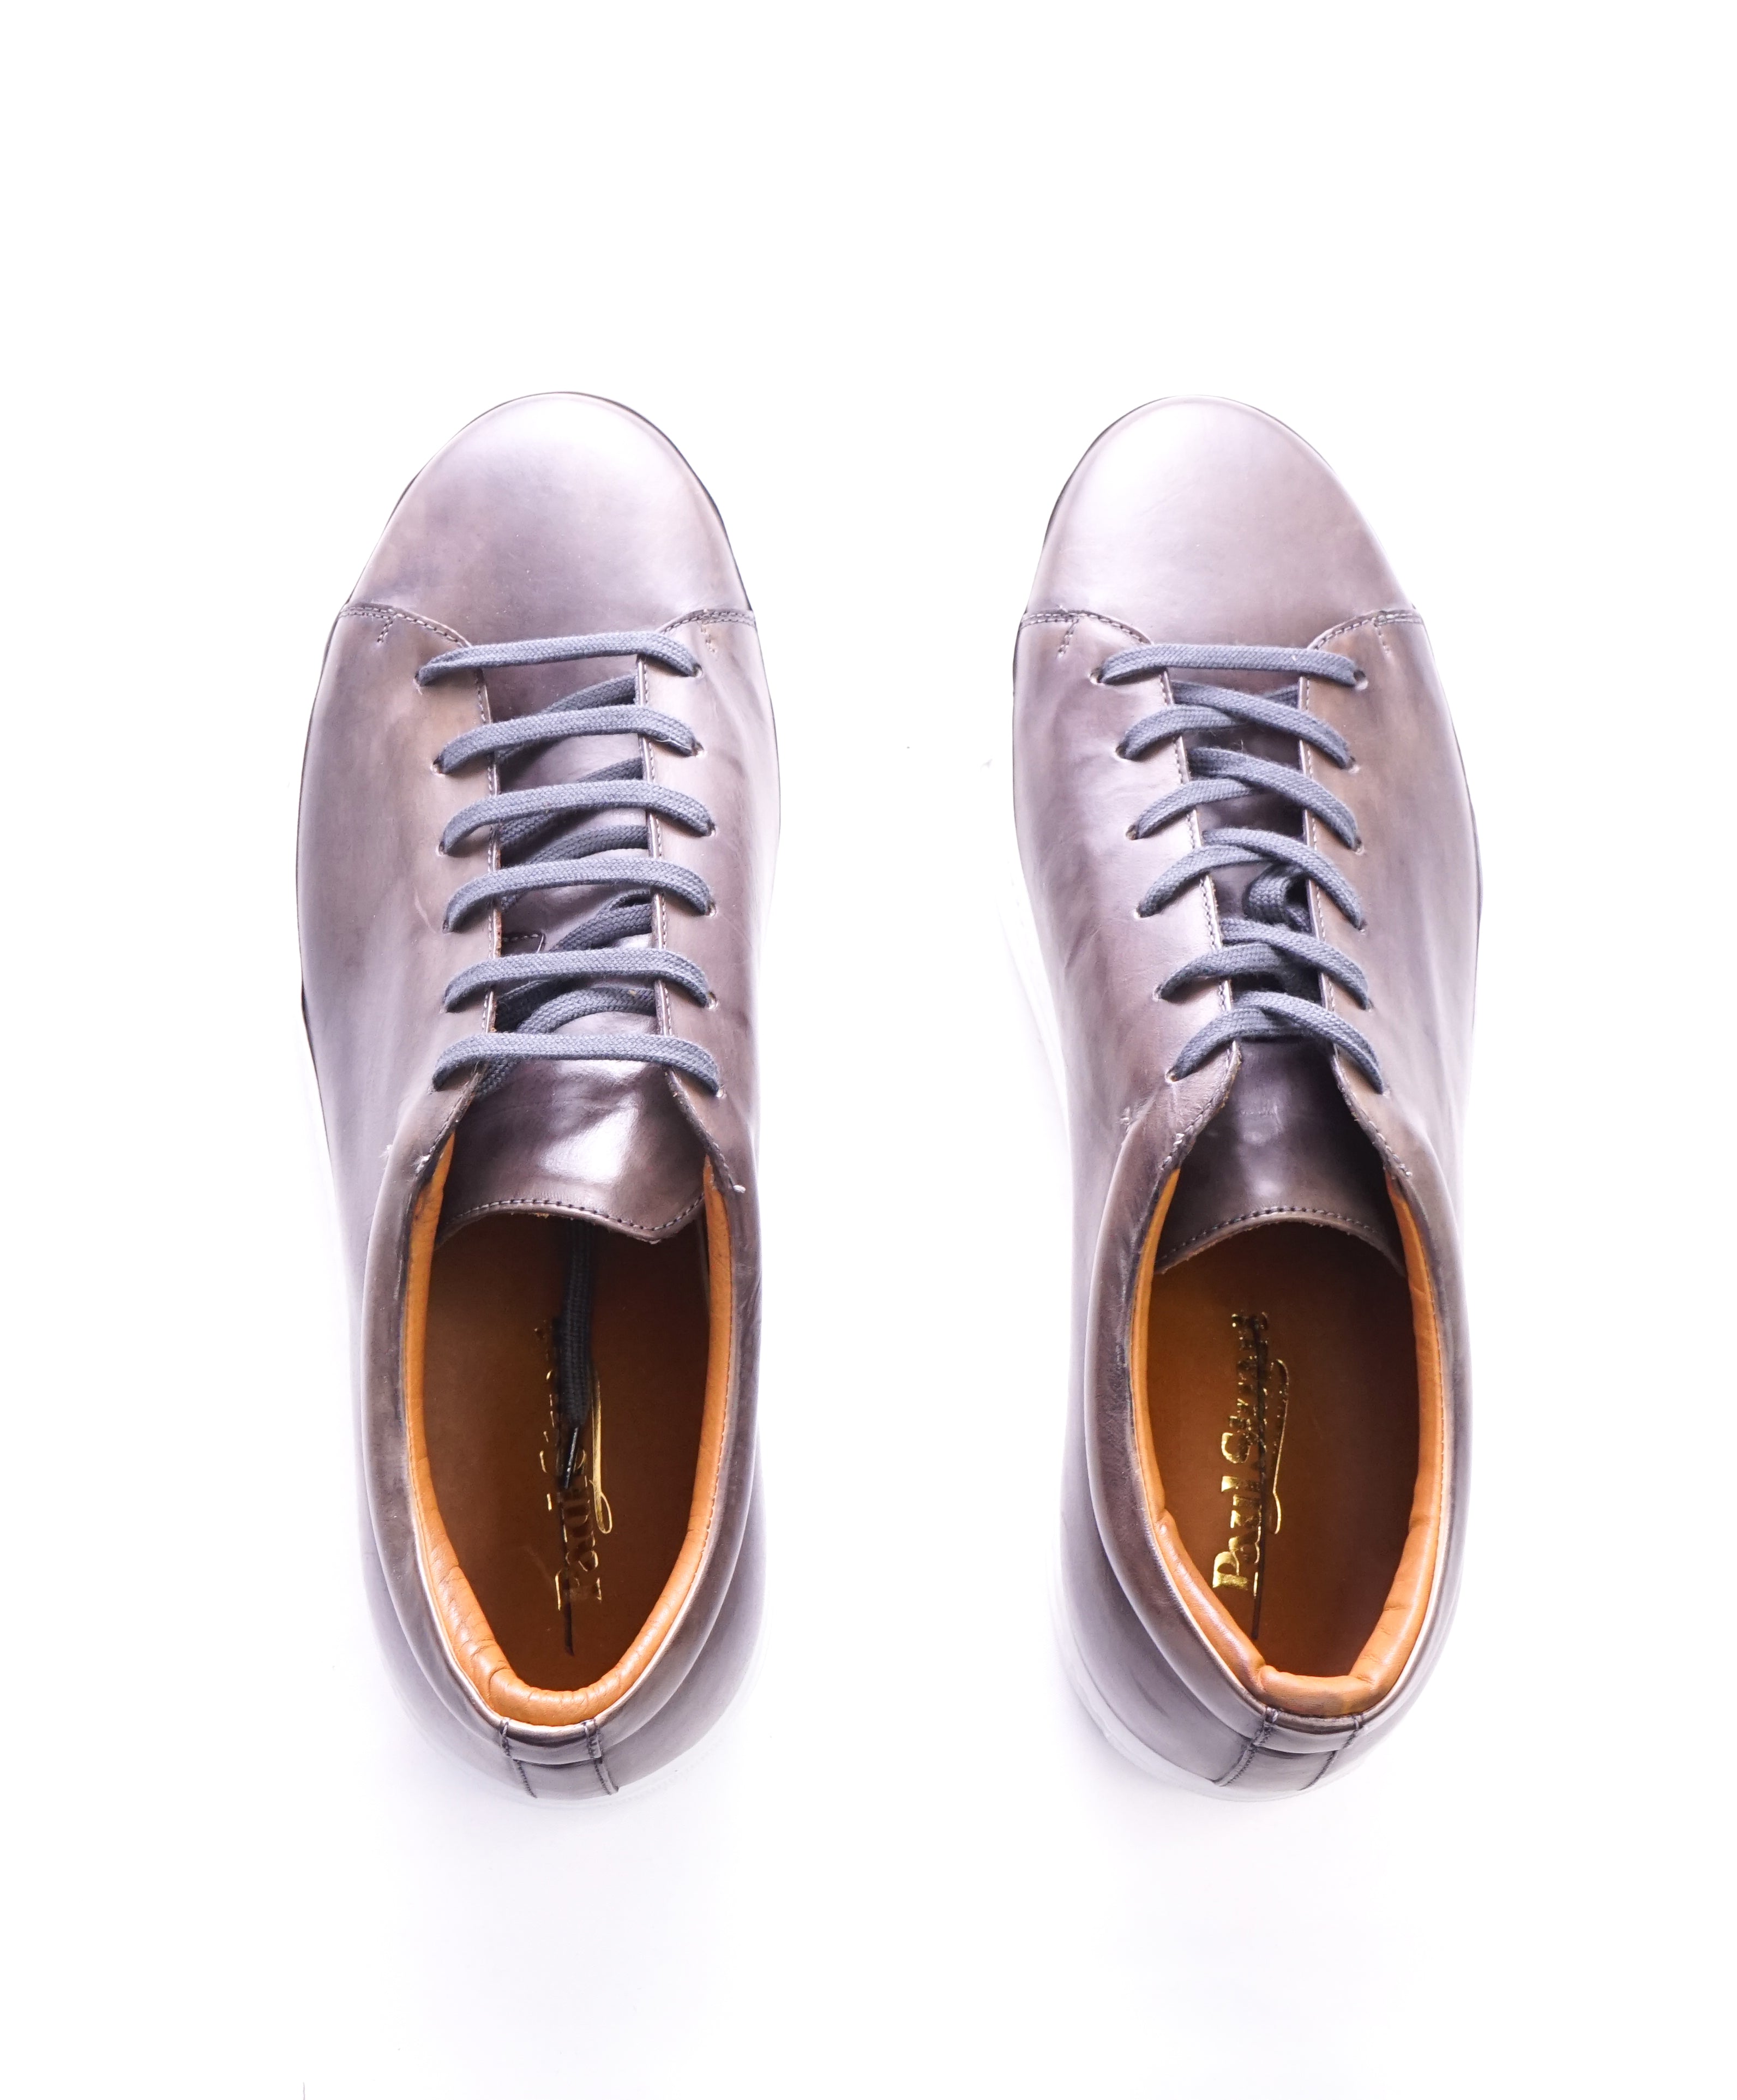 PAUL STUART - HAND MADE IN ITALY Patina Premium Leather Sneakers - 10 ...